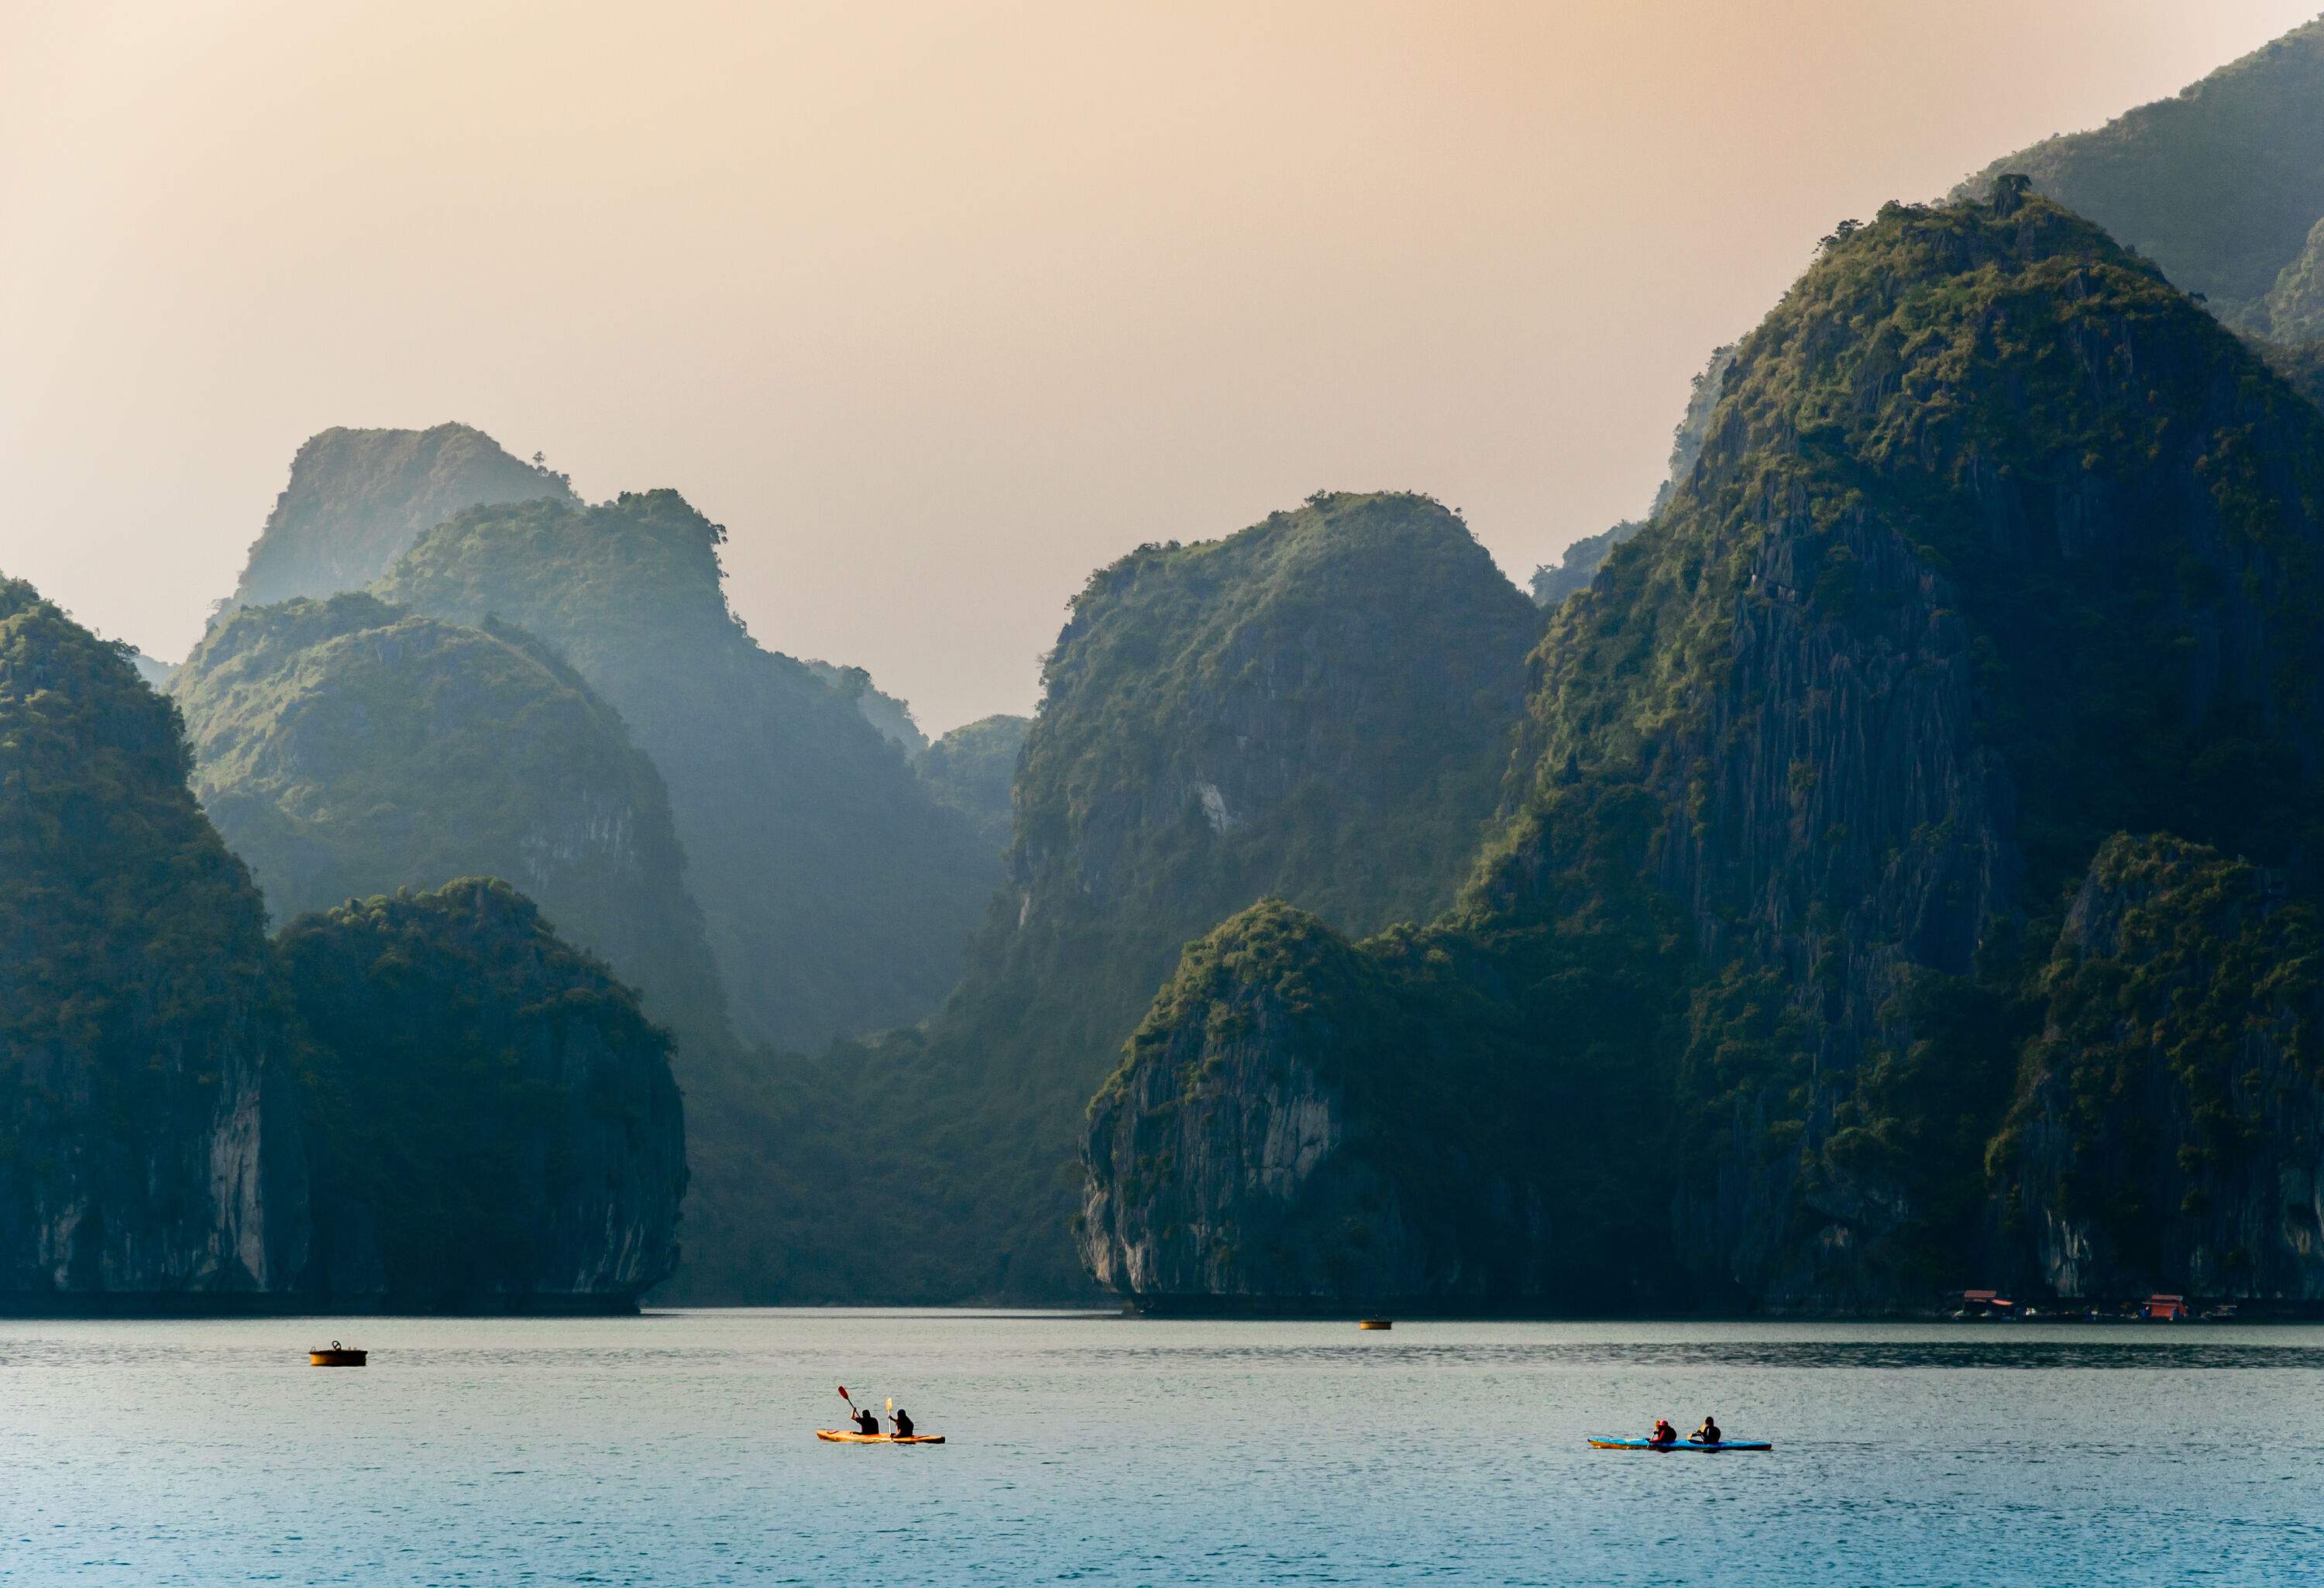 A serene sea with people kayaking amidst picturesque limestone karsts, resembling a scene from a fairy tale.